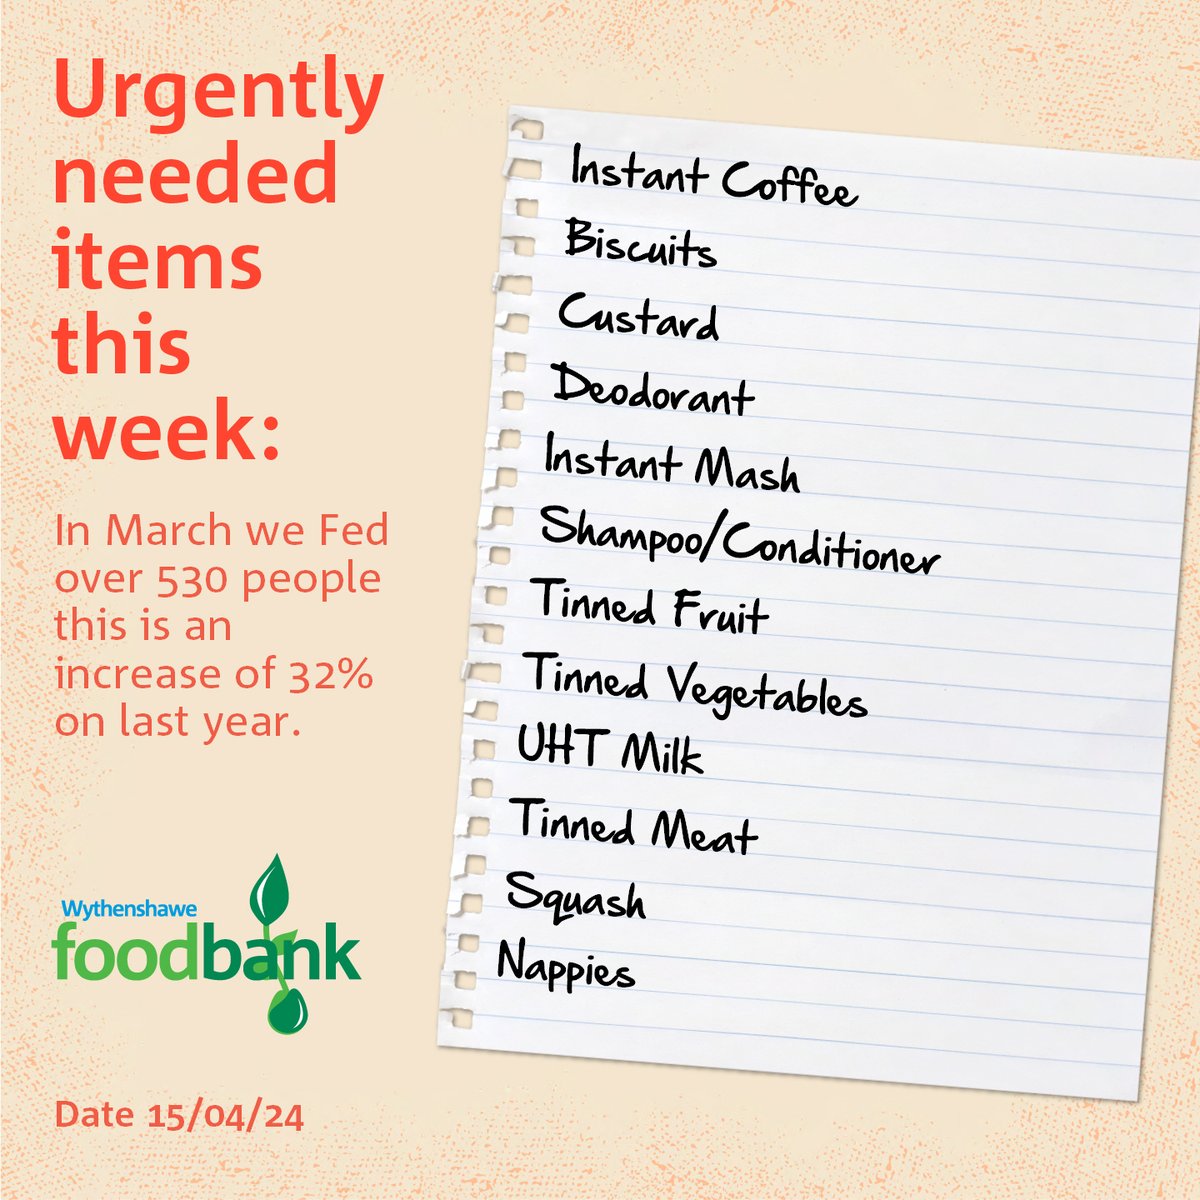 Hey there! We're having a busy start to the year and could really use your support. Check out our list of needed items and donate to help us out 🛒💛 More info on drop-off locations here: wythenshawe.foodbank.org.uk/give-help/dona… #communitysupport #helpingothers #donate #givingback